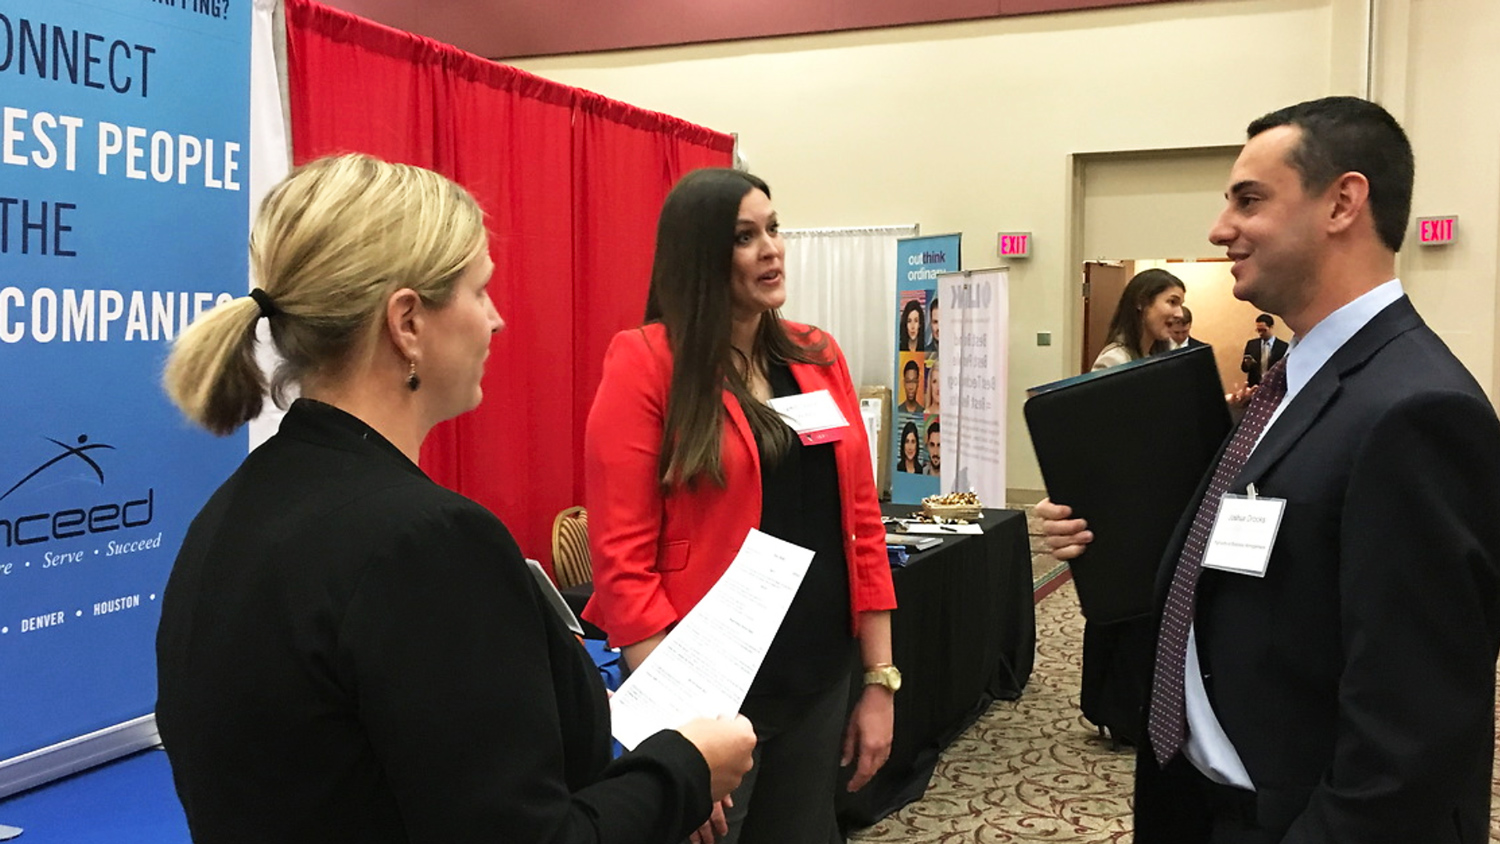 Professionally dressed people talk at a career event